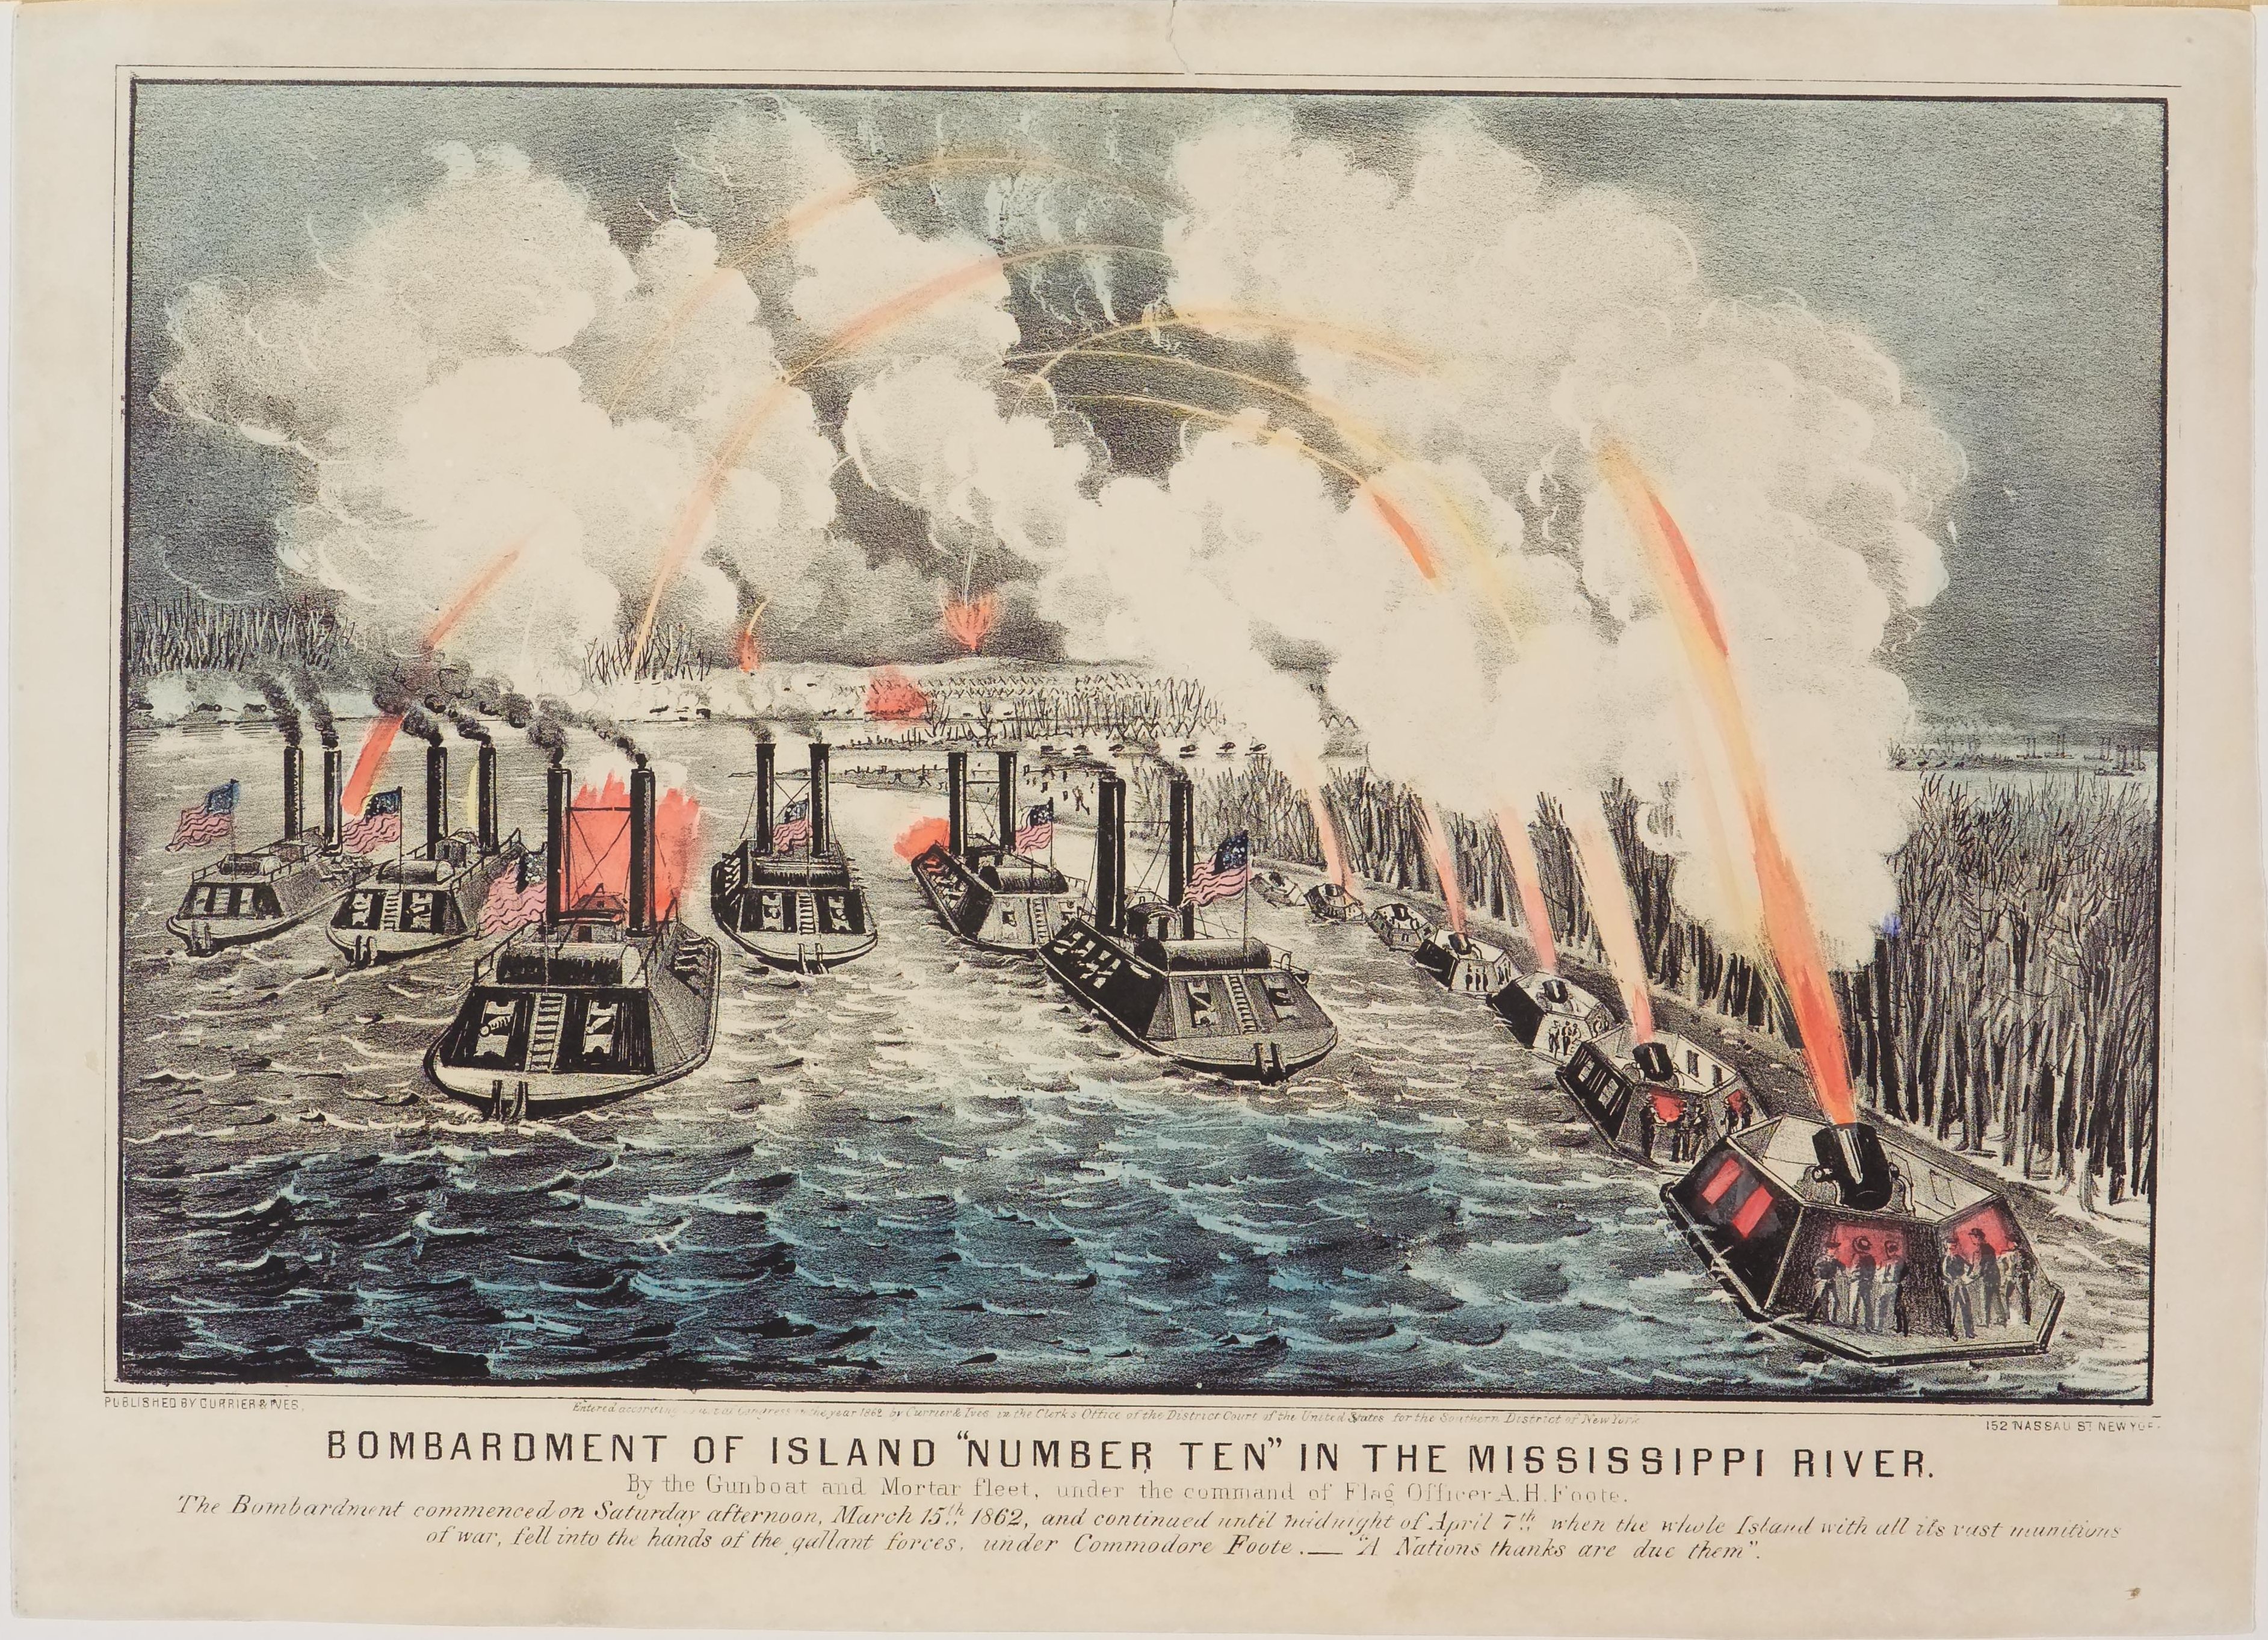 Daytime battle scene - seven large gun boats from left to right in foreground